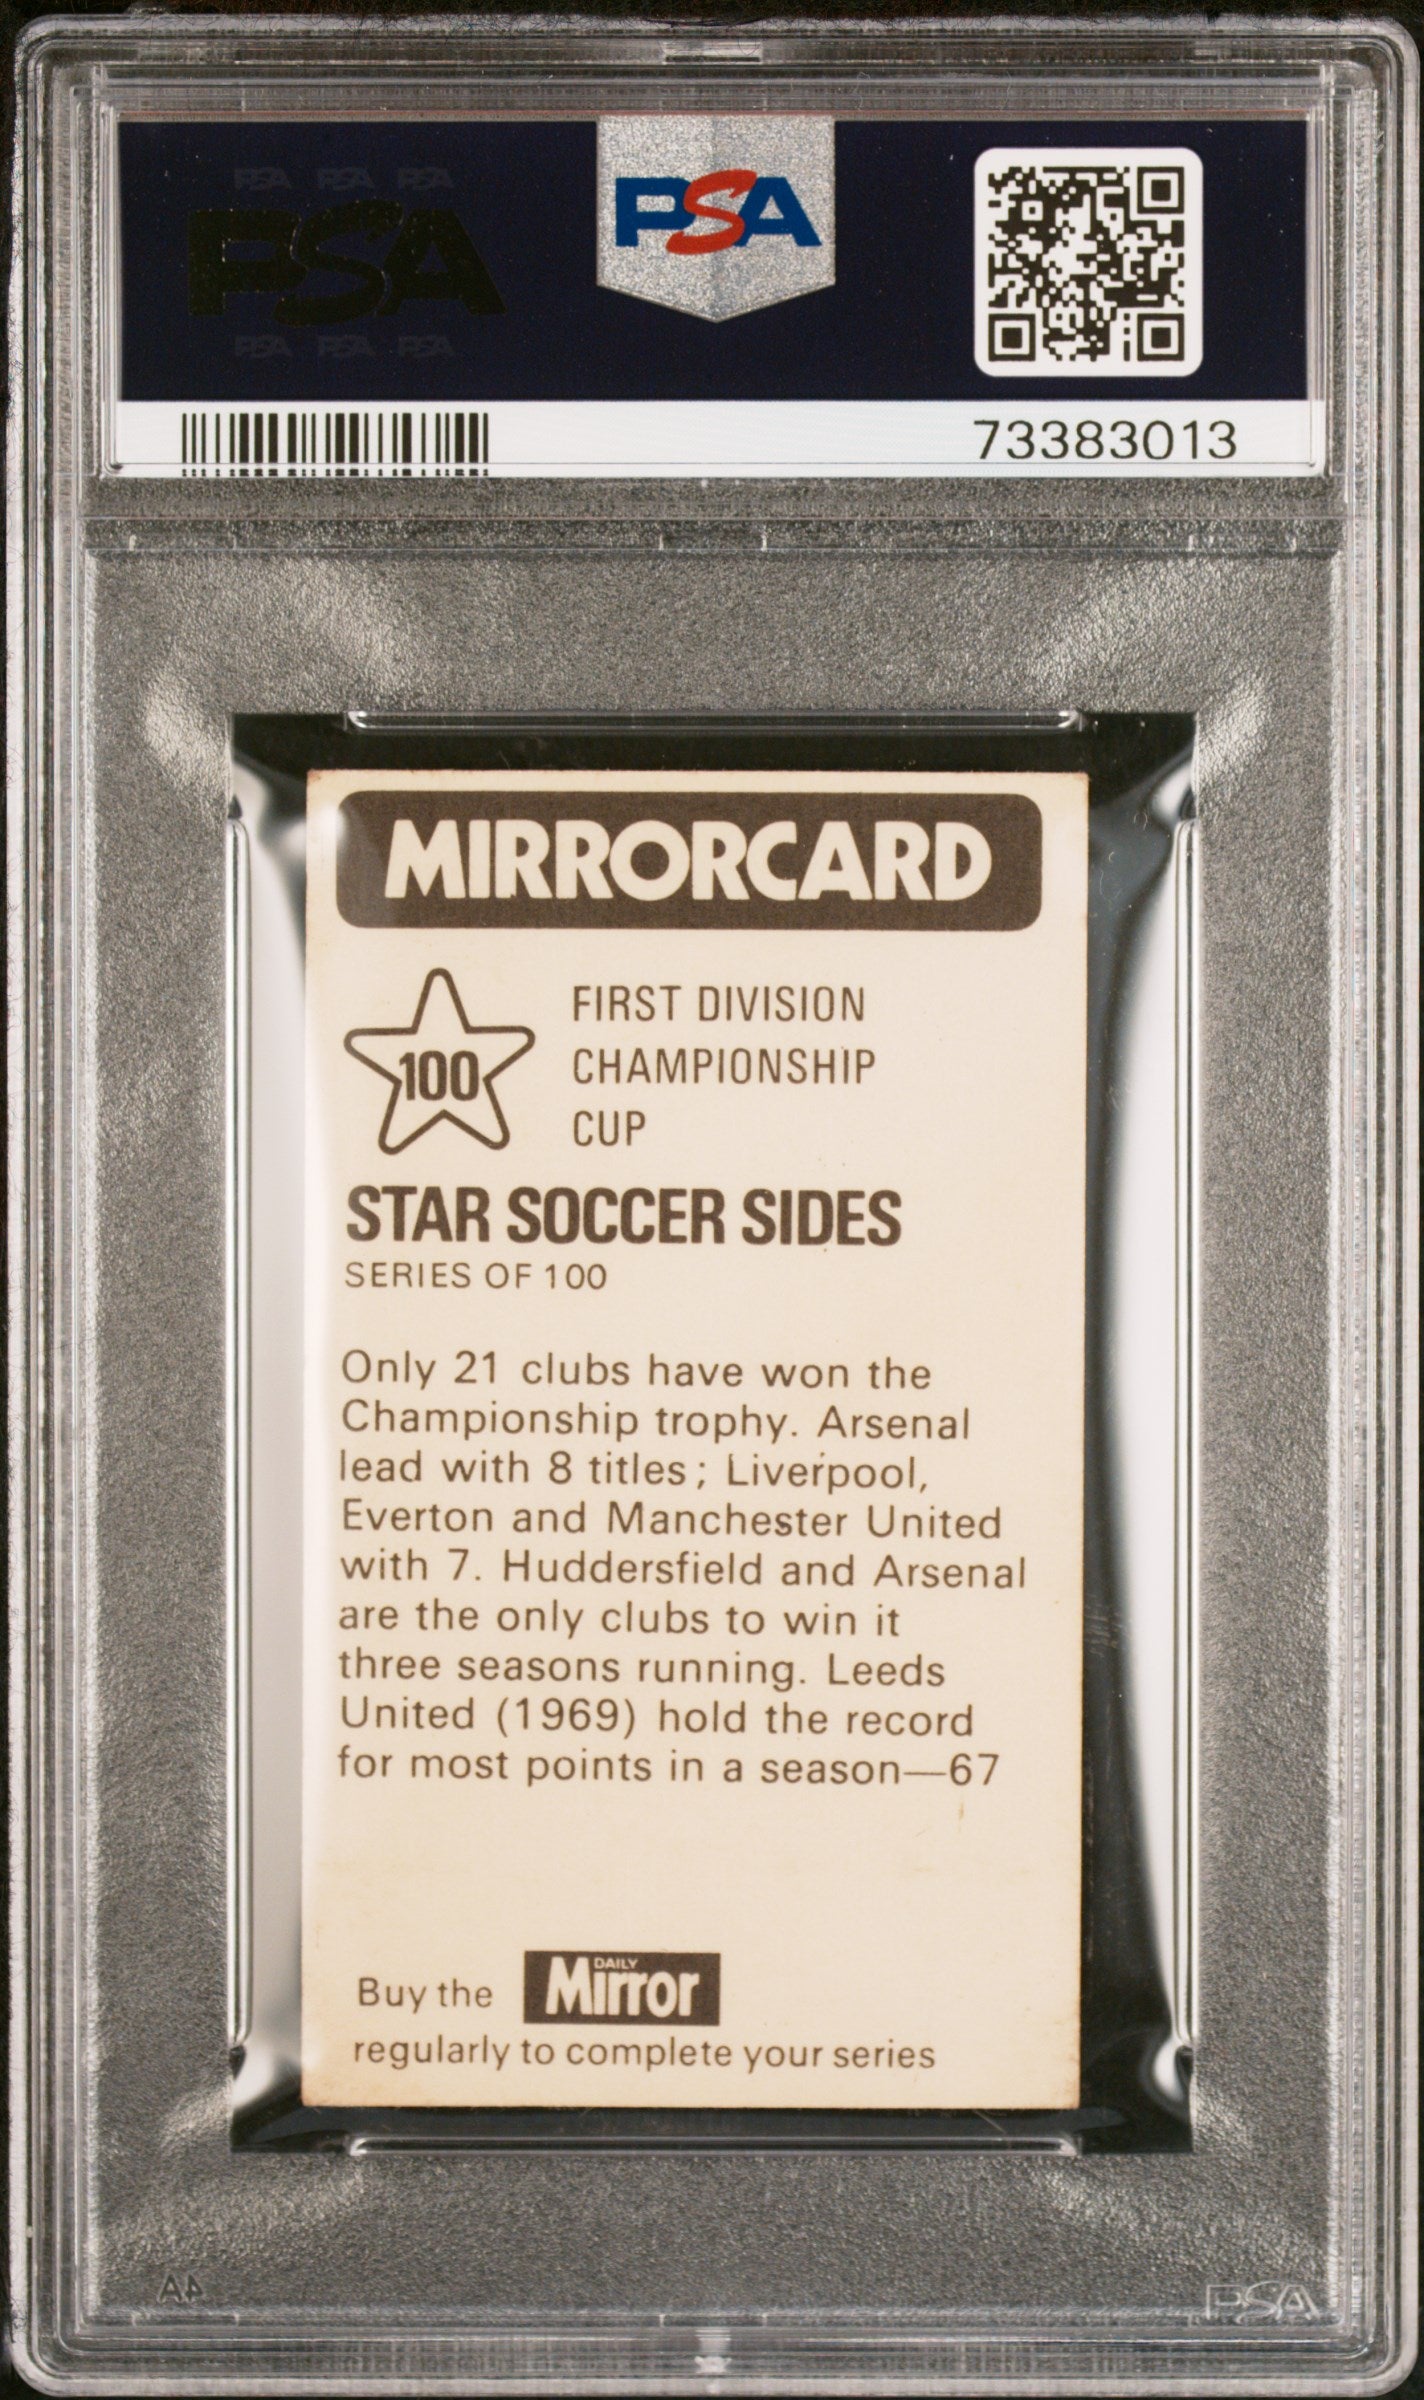 1971 DAILY MIRROR STAR SOCCER SIDES 100 FIRST DIVISION CHAMPIONSHIP CUP PSA 3